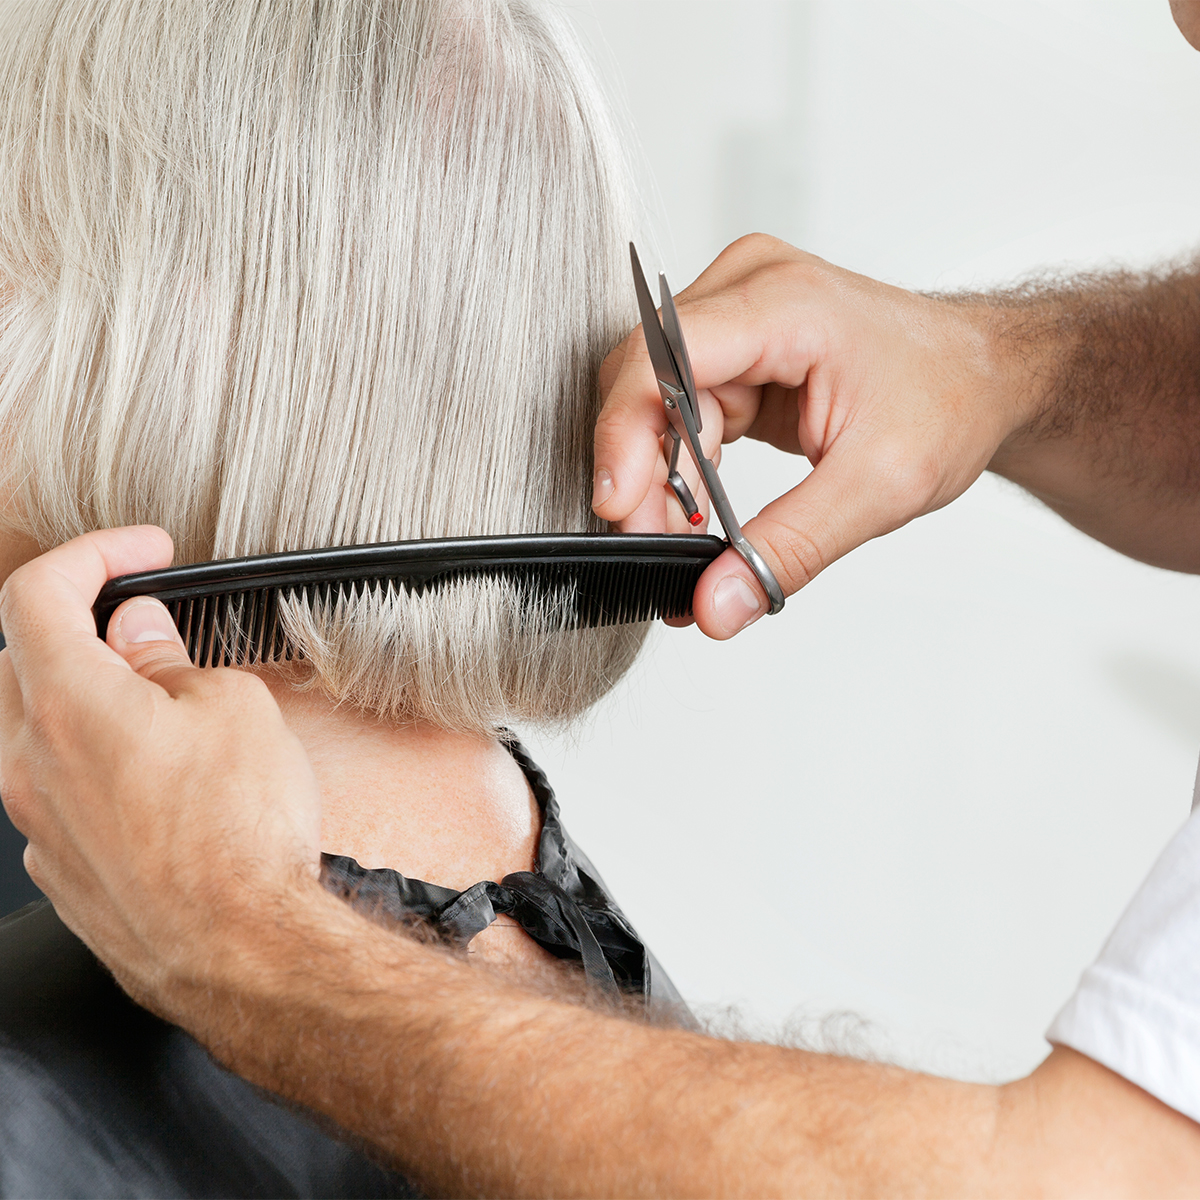 Avoid These 'Old' Hairstyles For Mature Women That Are Quickly